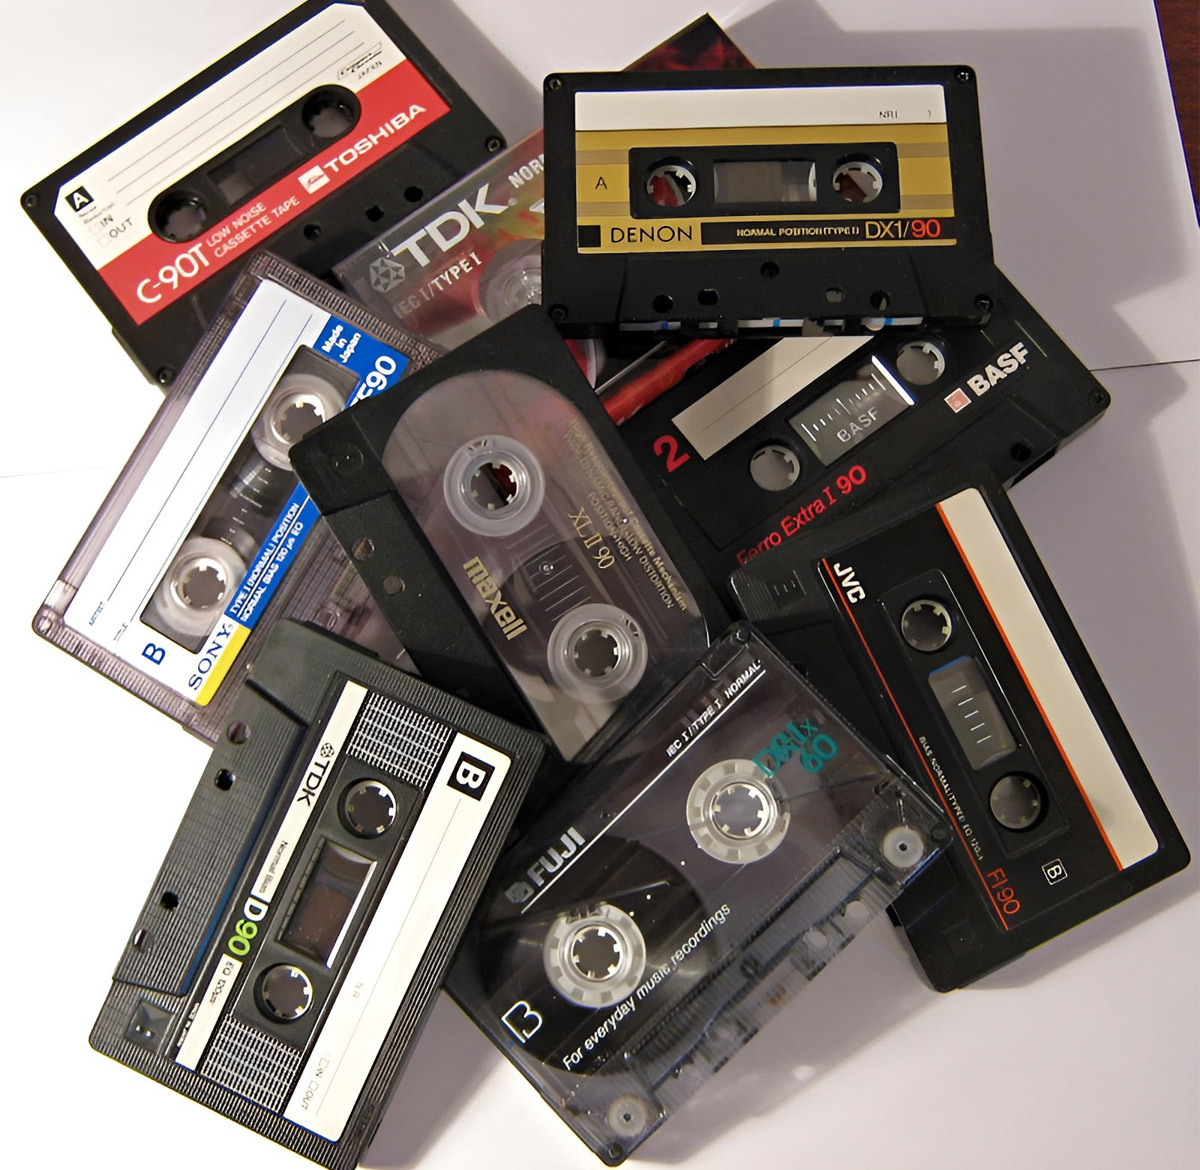 Imported cassettes